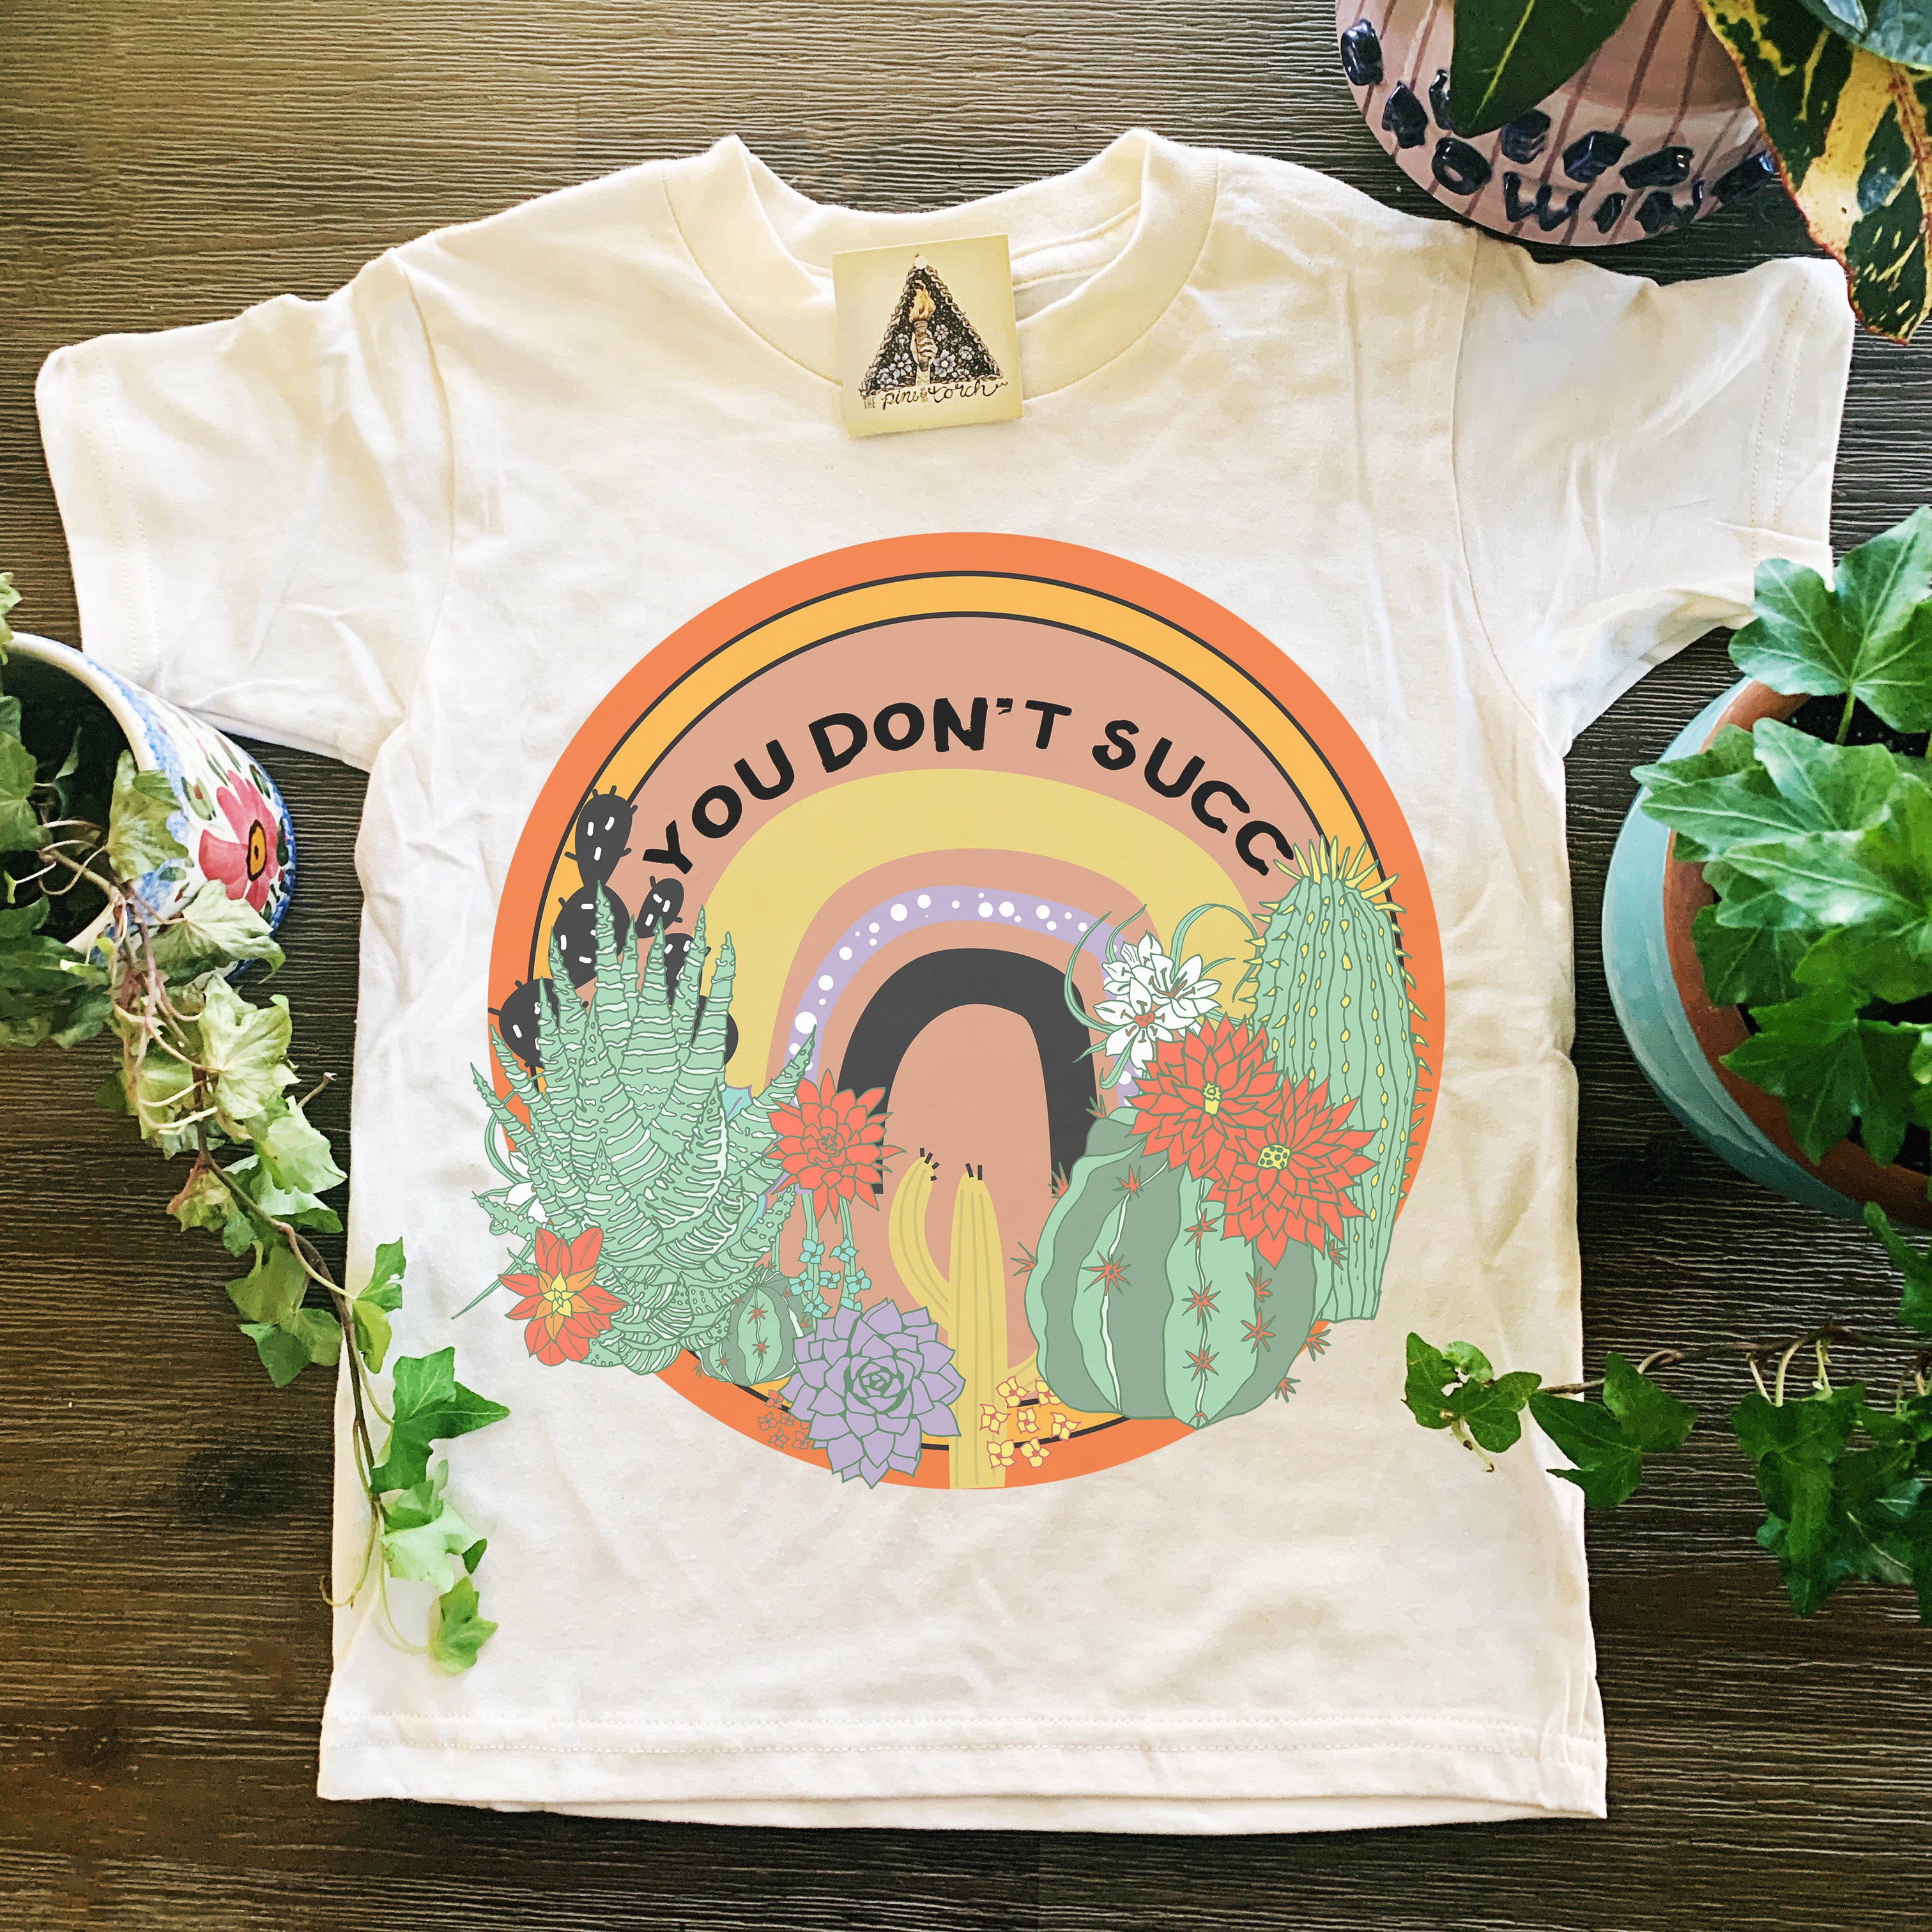 « YOU DON'T SUCC » KID'S TEE